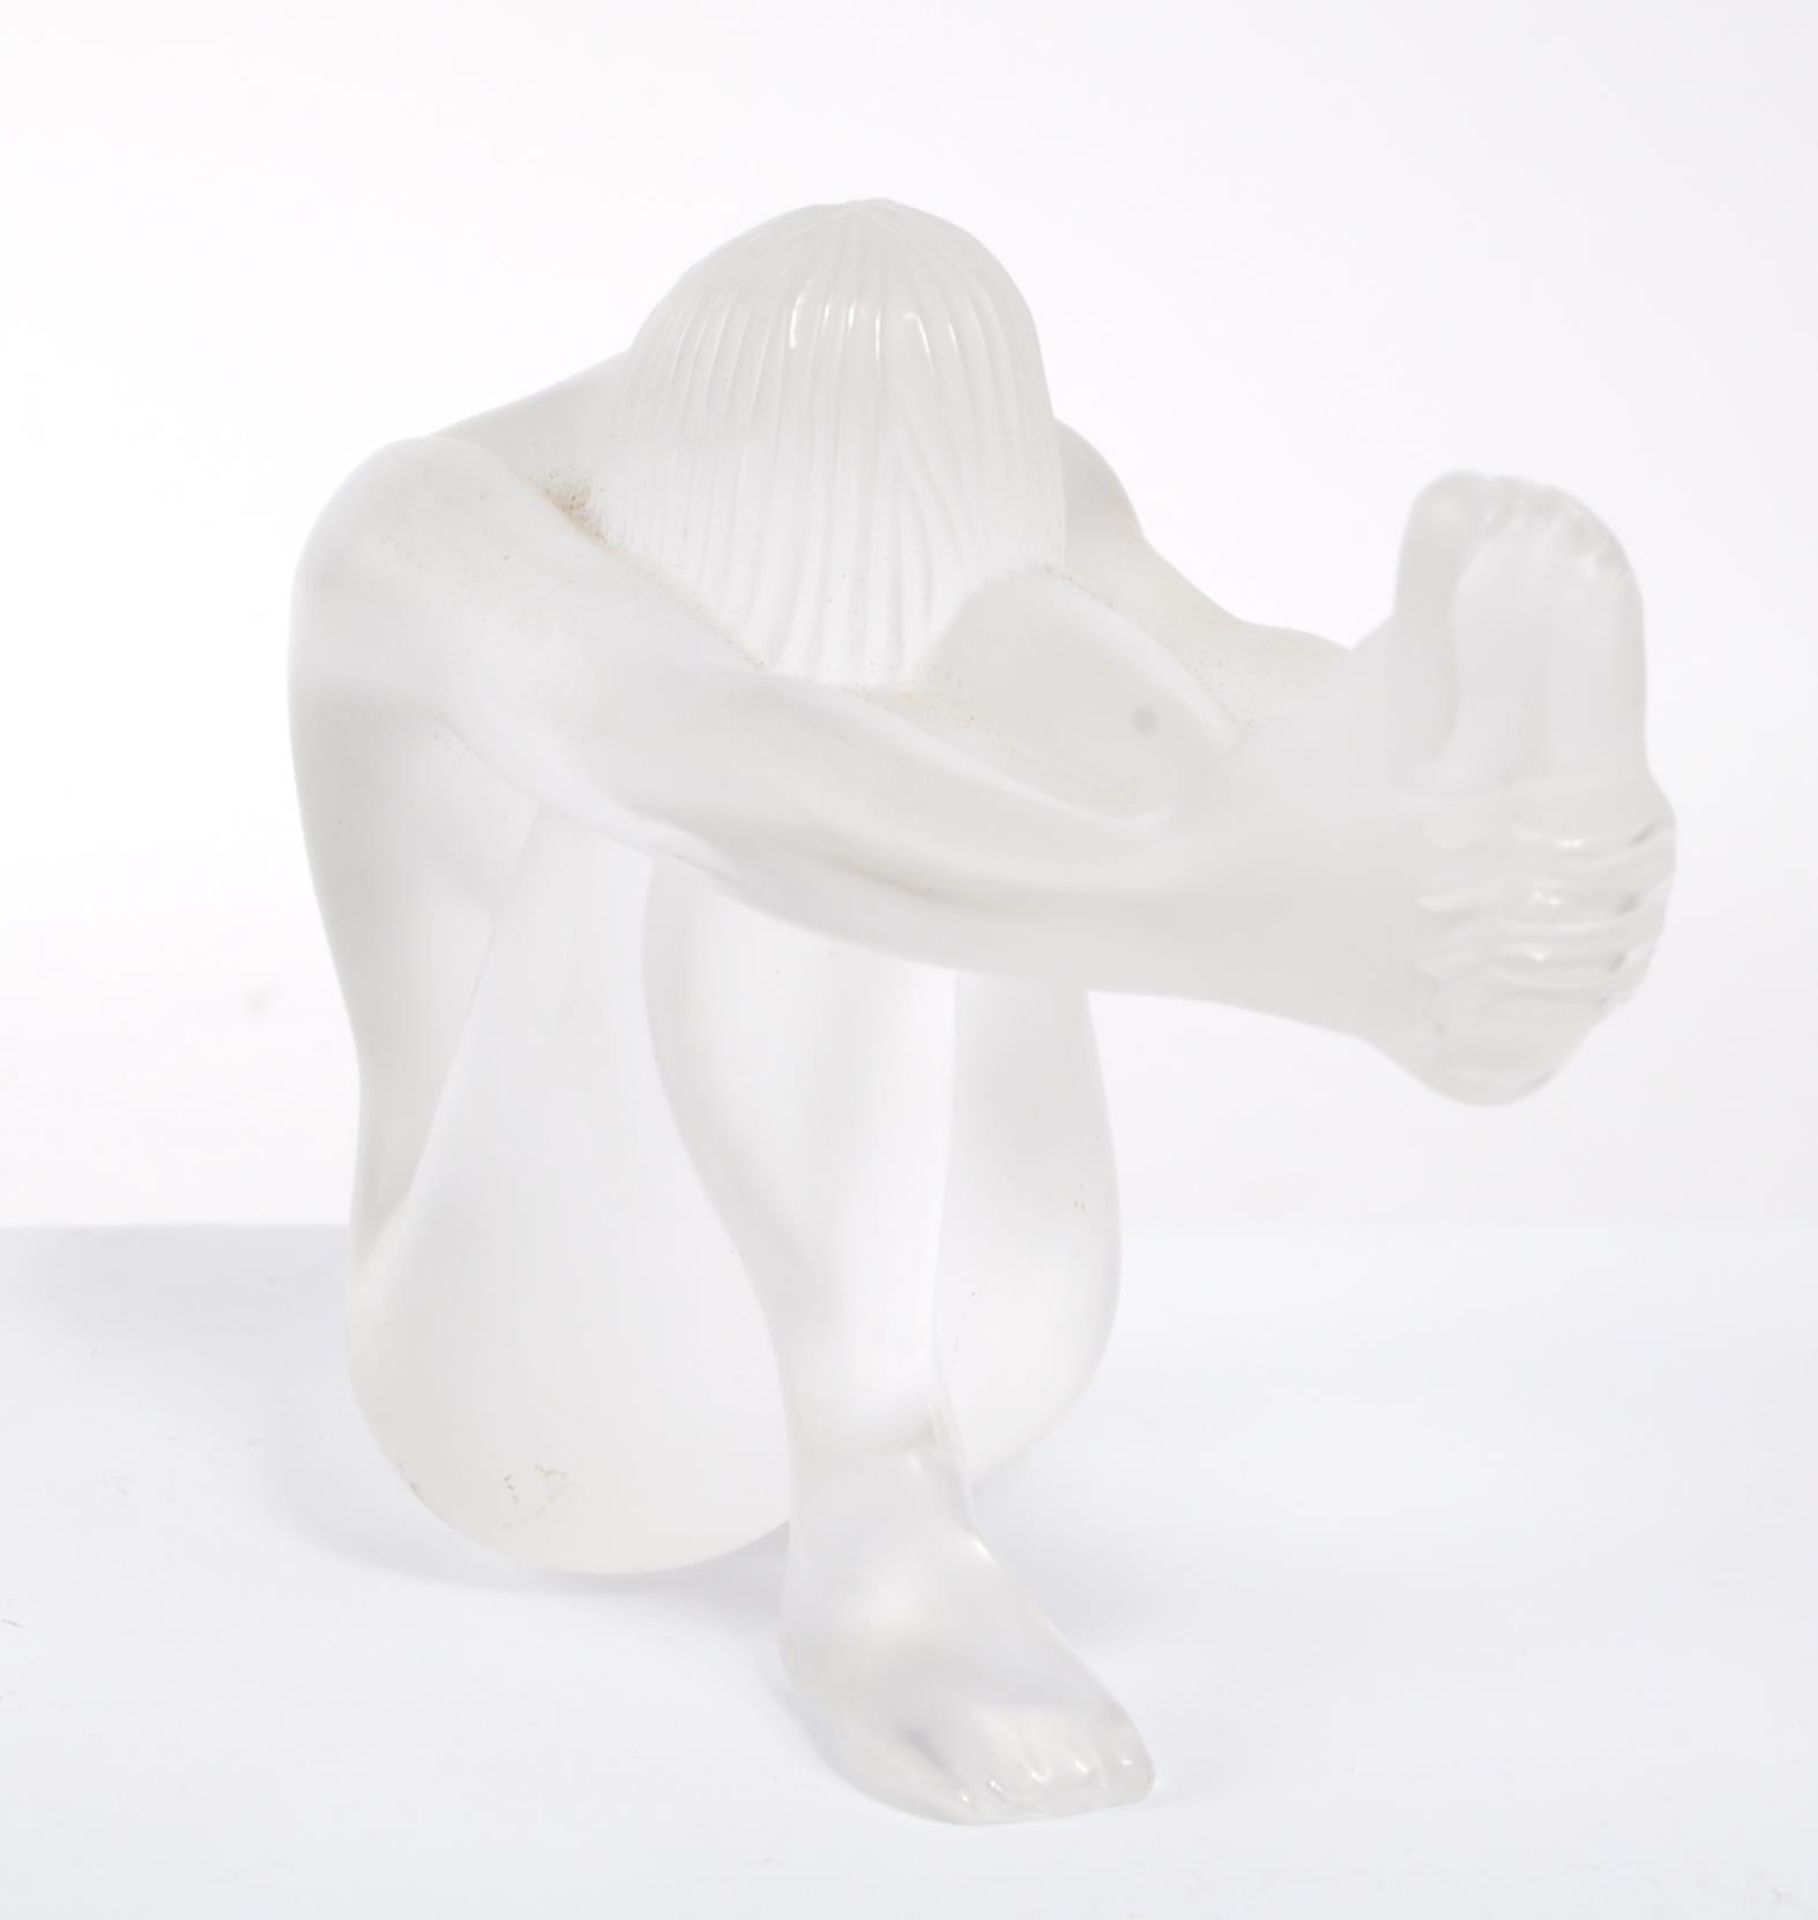 LALIQUE - STUDIO FROSTED ART GLASS OF NUDE FEMALE - Image 4 of 4